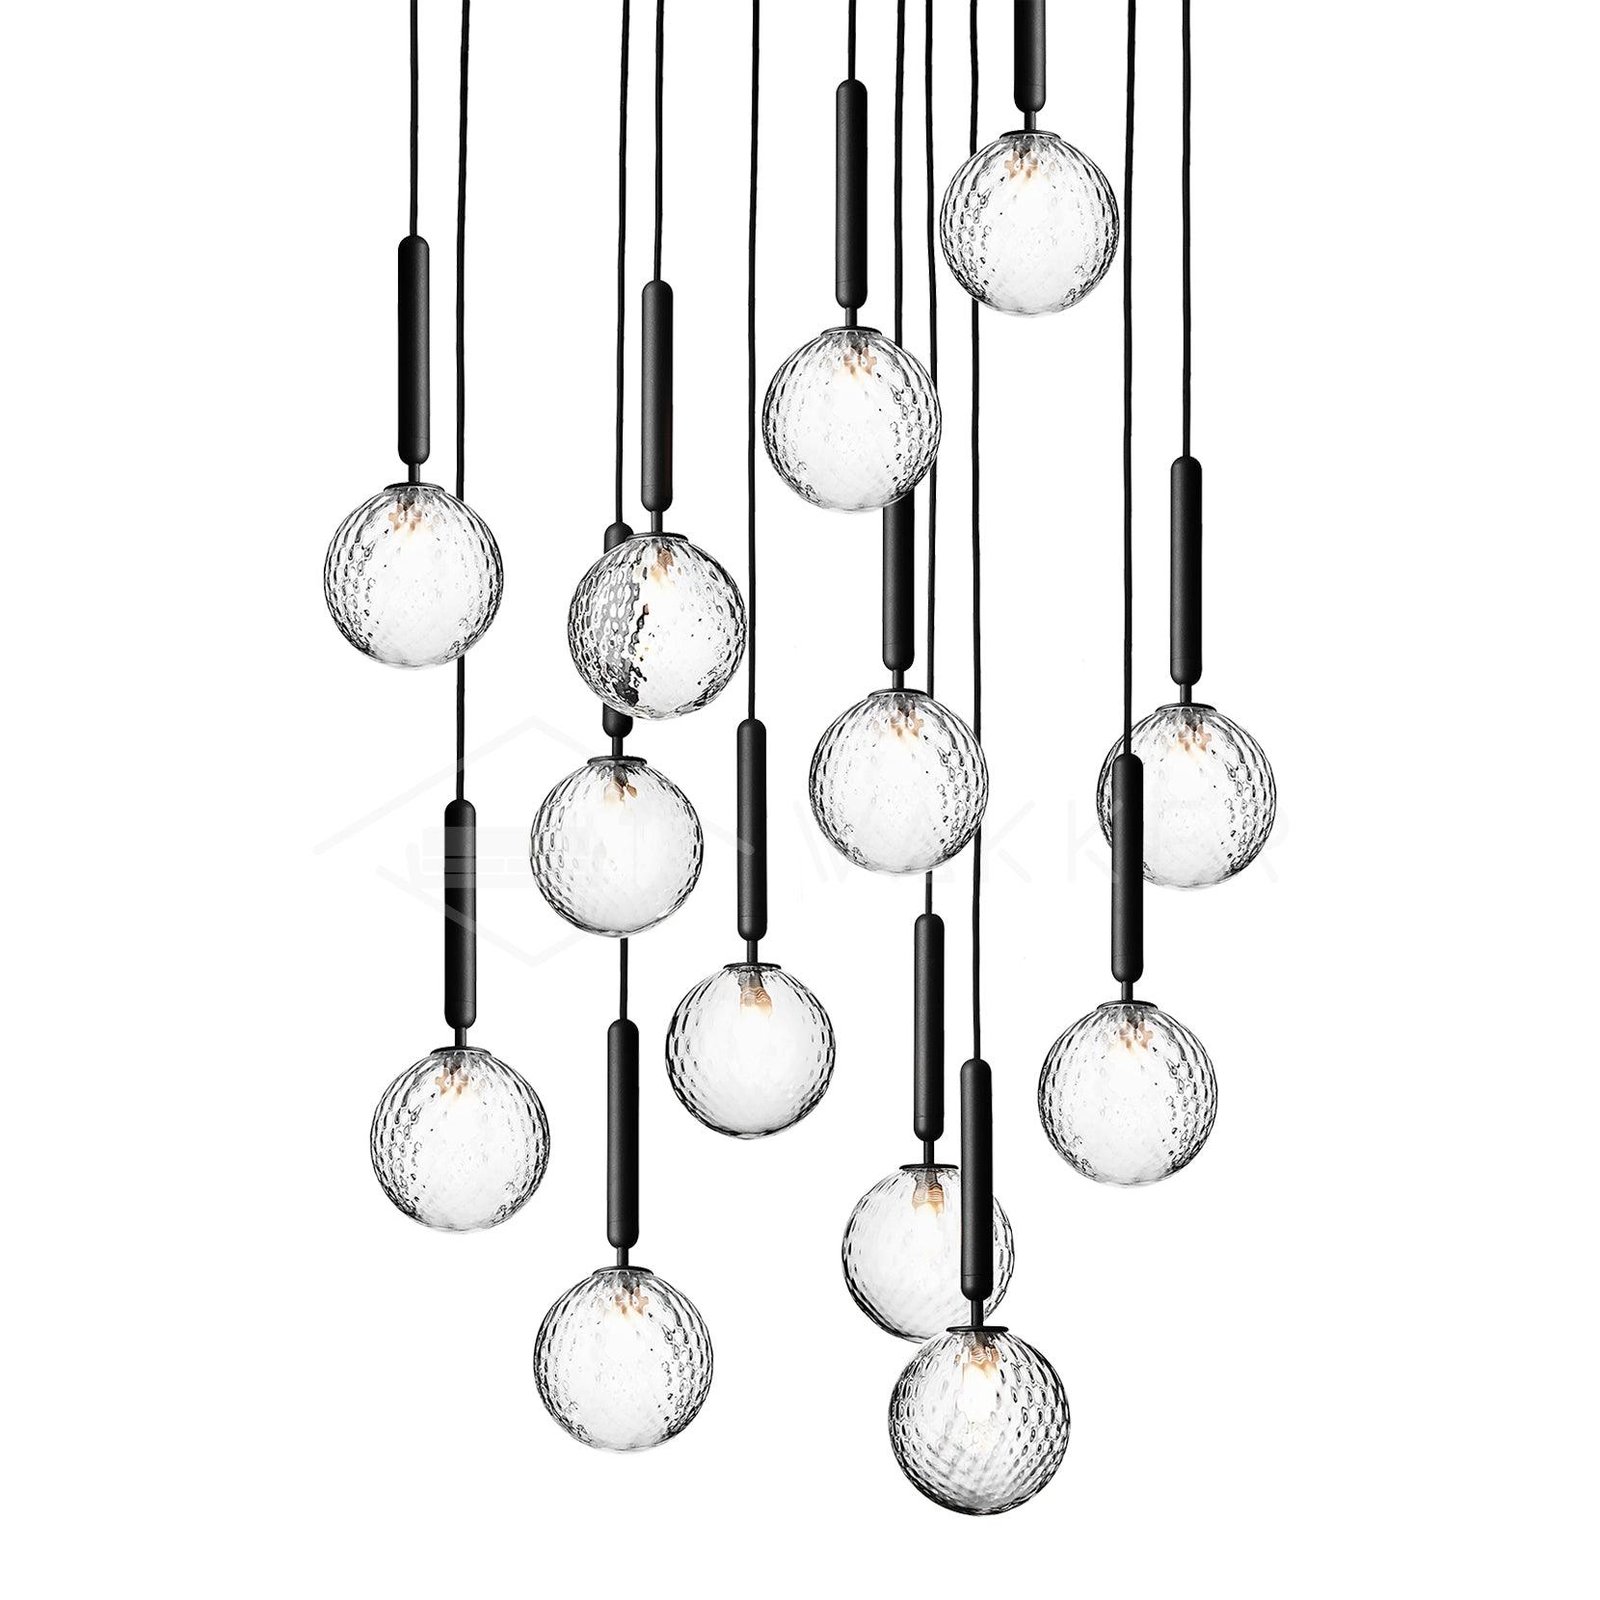 Miira Pendant Light with 13 heads, measuring 23.6 inches in diameter and 78.7 inches in height (60cm x 200cm), available in a stylish black color with a clear finish.